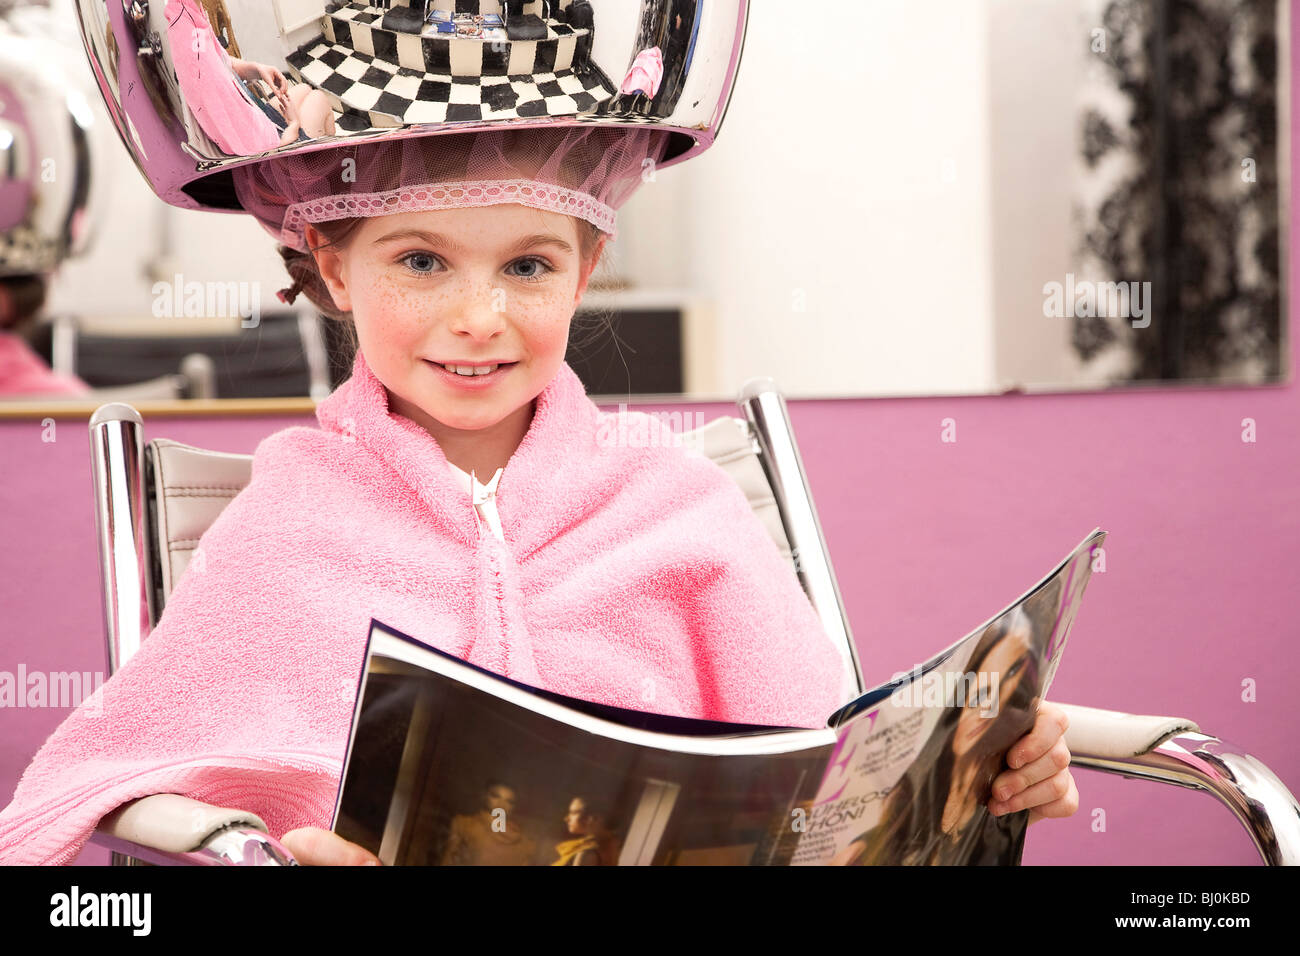 portrait of young girl sitting under hair dryer Stock Photo